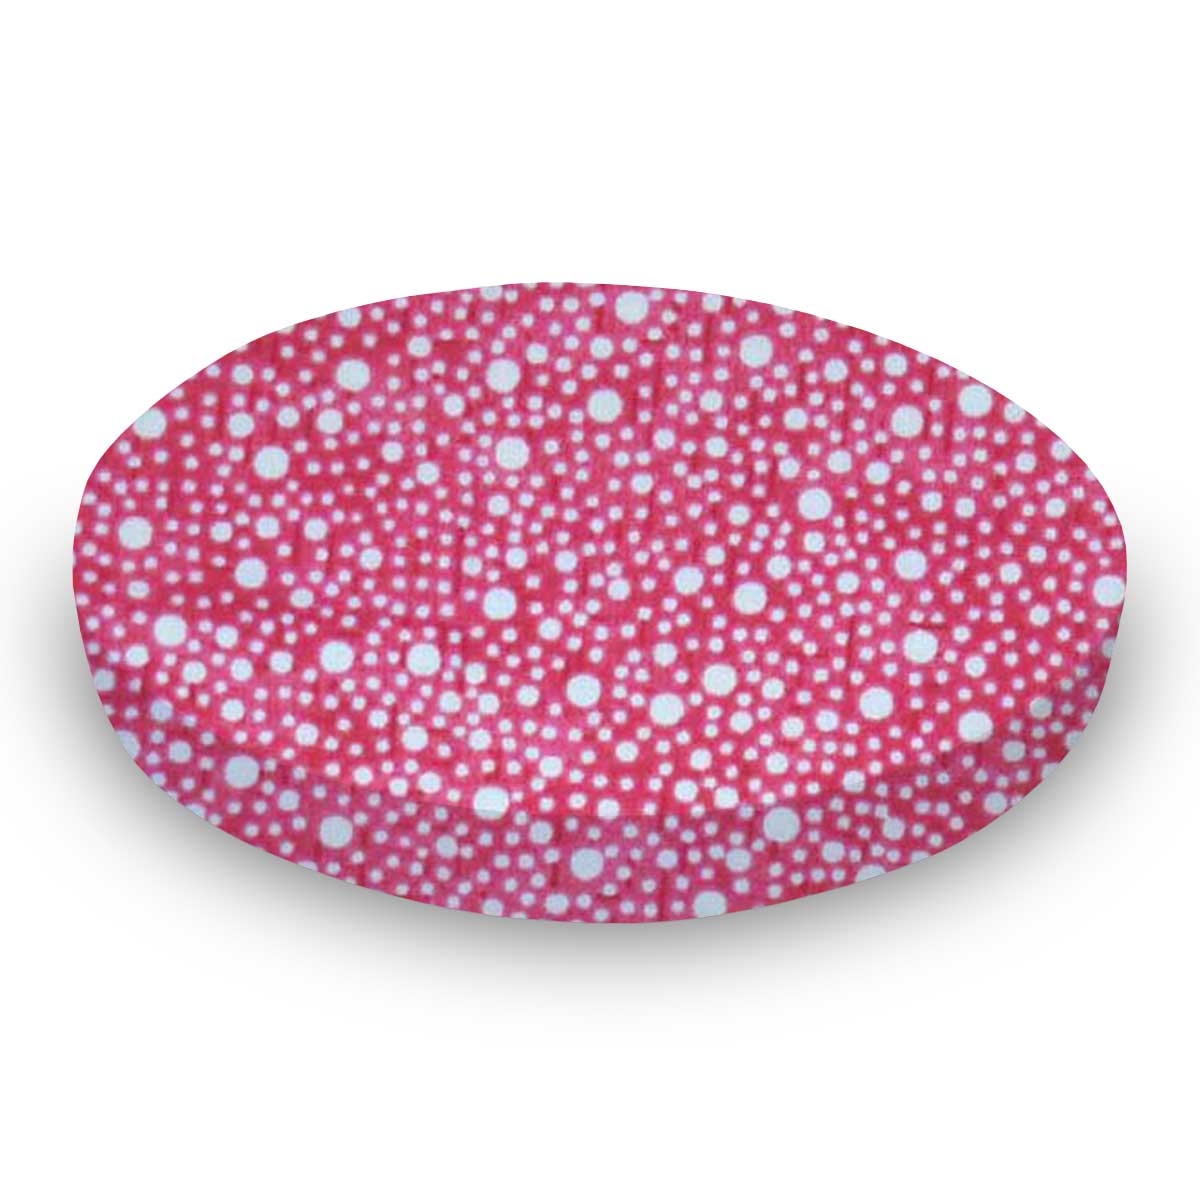 Oval Crib (Stokke Sleepi) - Confetti Dots Hot Pink - Fitted  Oval